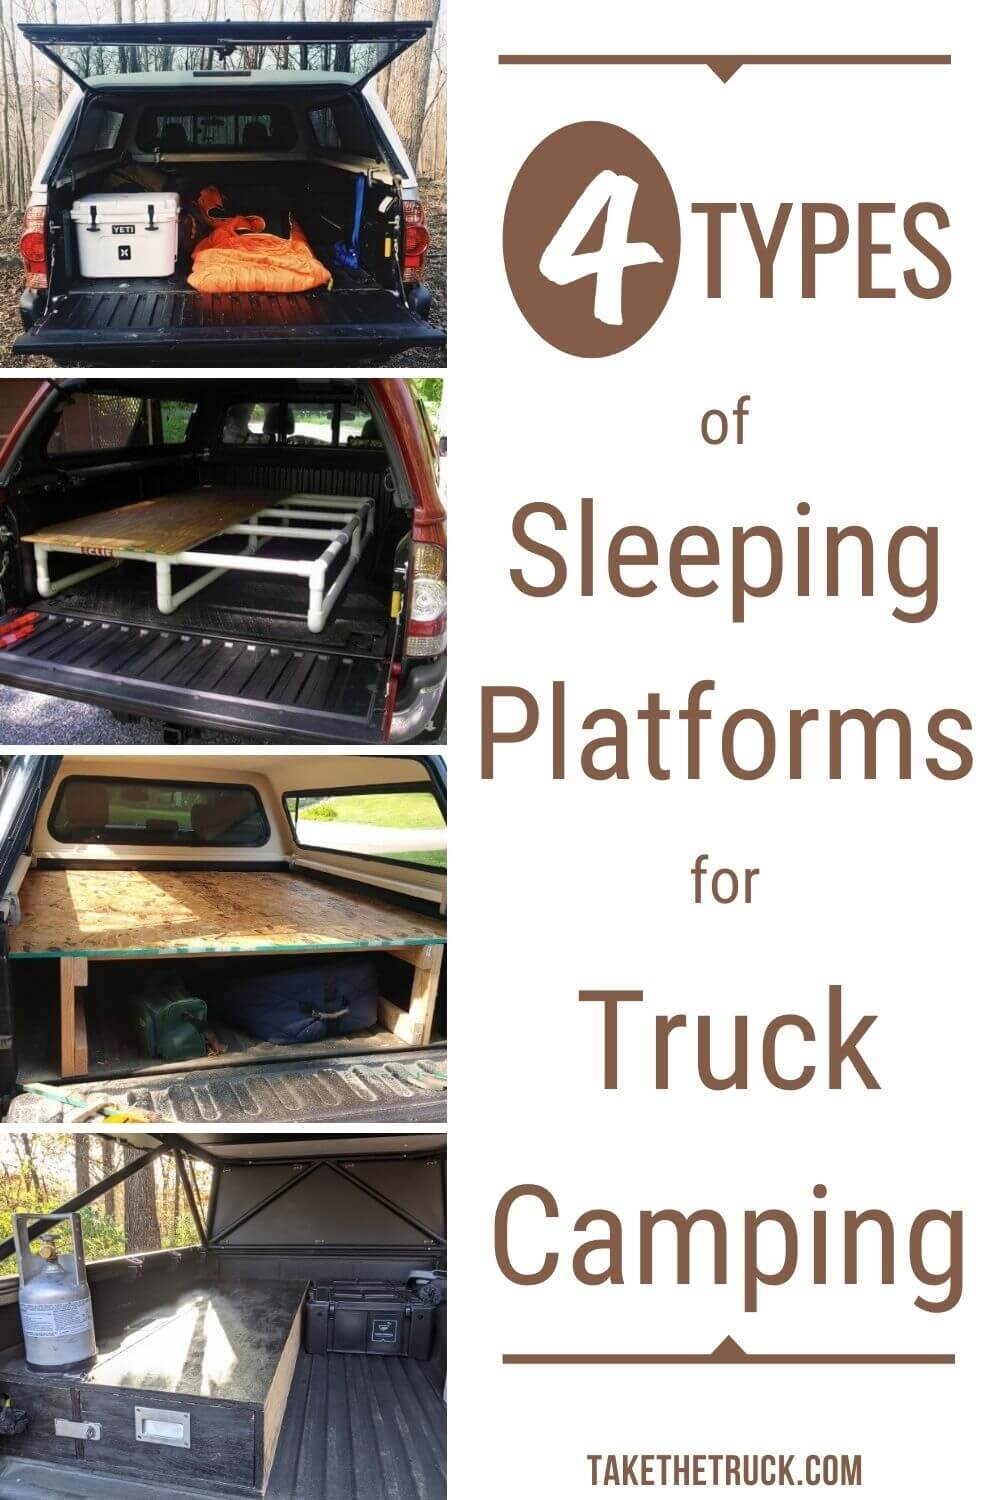 Pros and cons of DIY truck bed camping platform builds. Will help you with DIY elevated sleeping platform ideas, plans, materials, and designs for your truck camper.